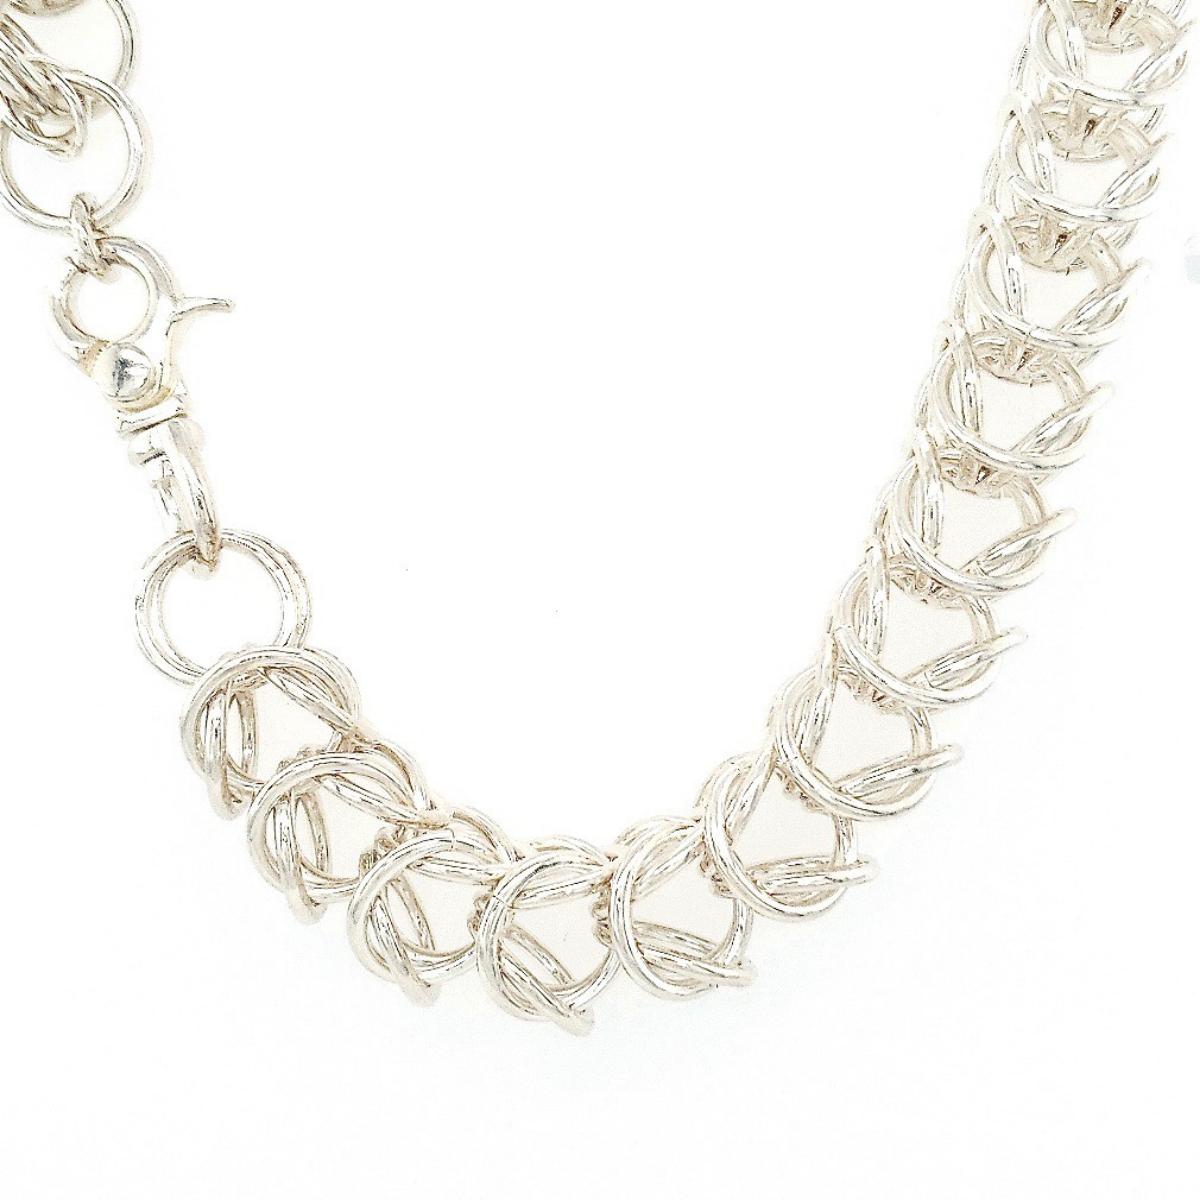 Argentium Silver Bellezza Necklace - main image on white background showing swivel lobster clasp